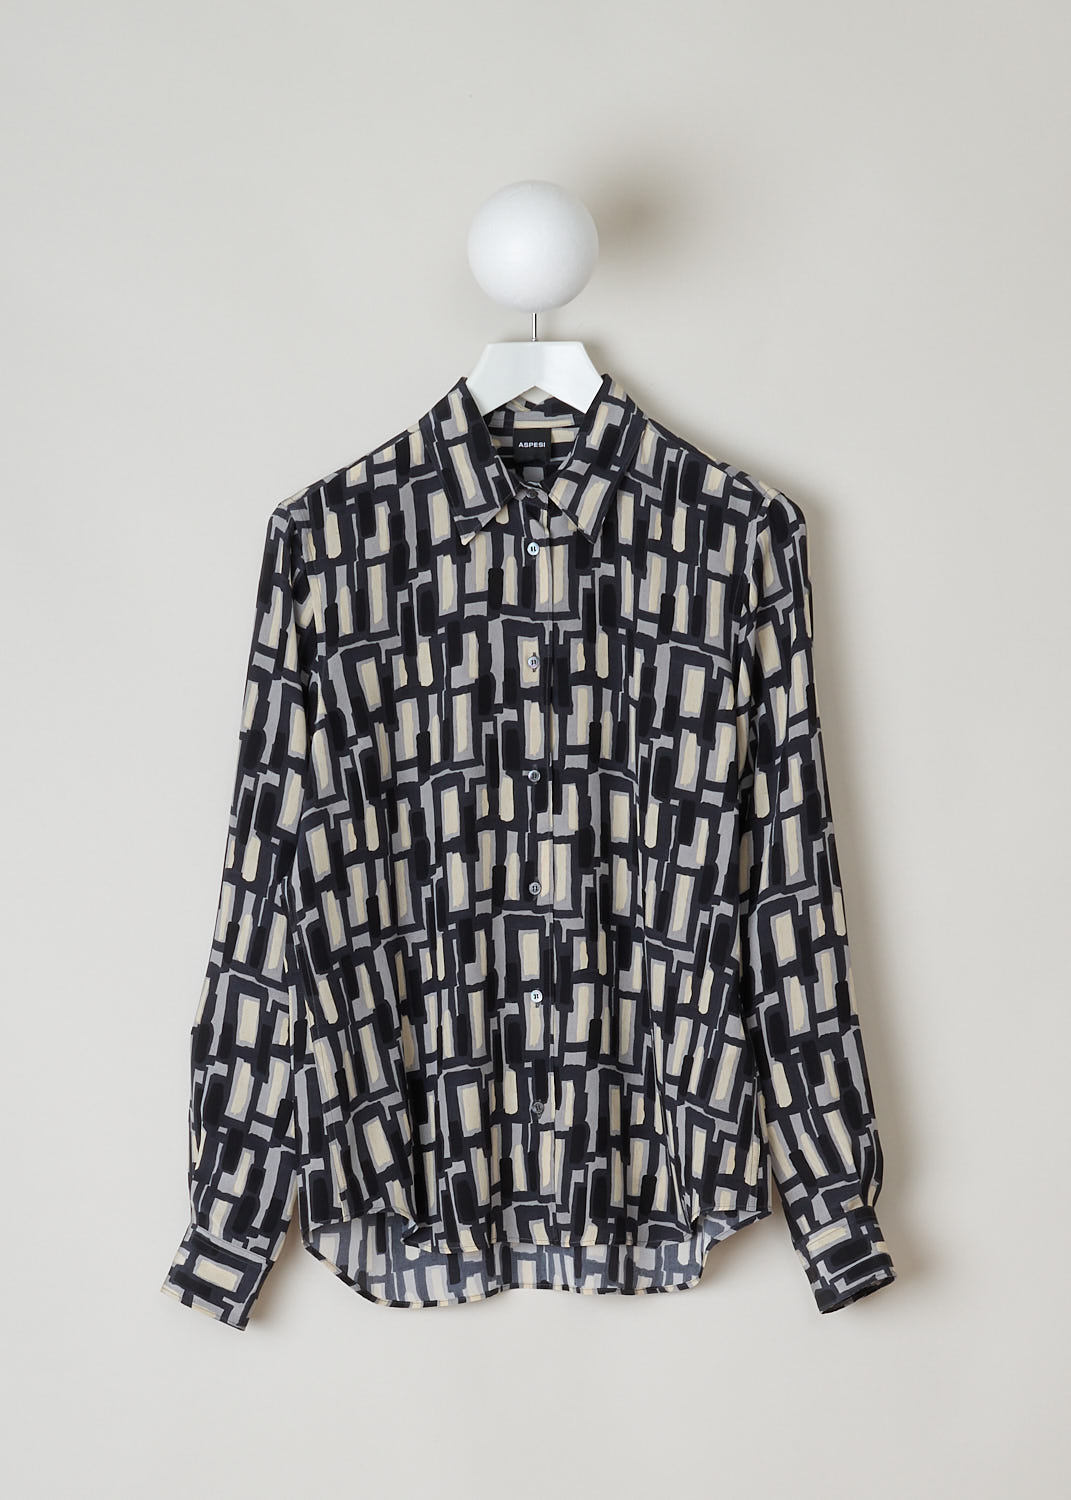 ASPESI, SILK PRINTED BLOUSE, 5422_V126_66173, Print, Front, This long sleeved blouse has a geometric print in black, grey and off-white hues. The blouse has a classic collar, front button closure and an asymmetric finish, meaning the back is slightly longer than the front. 
